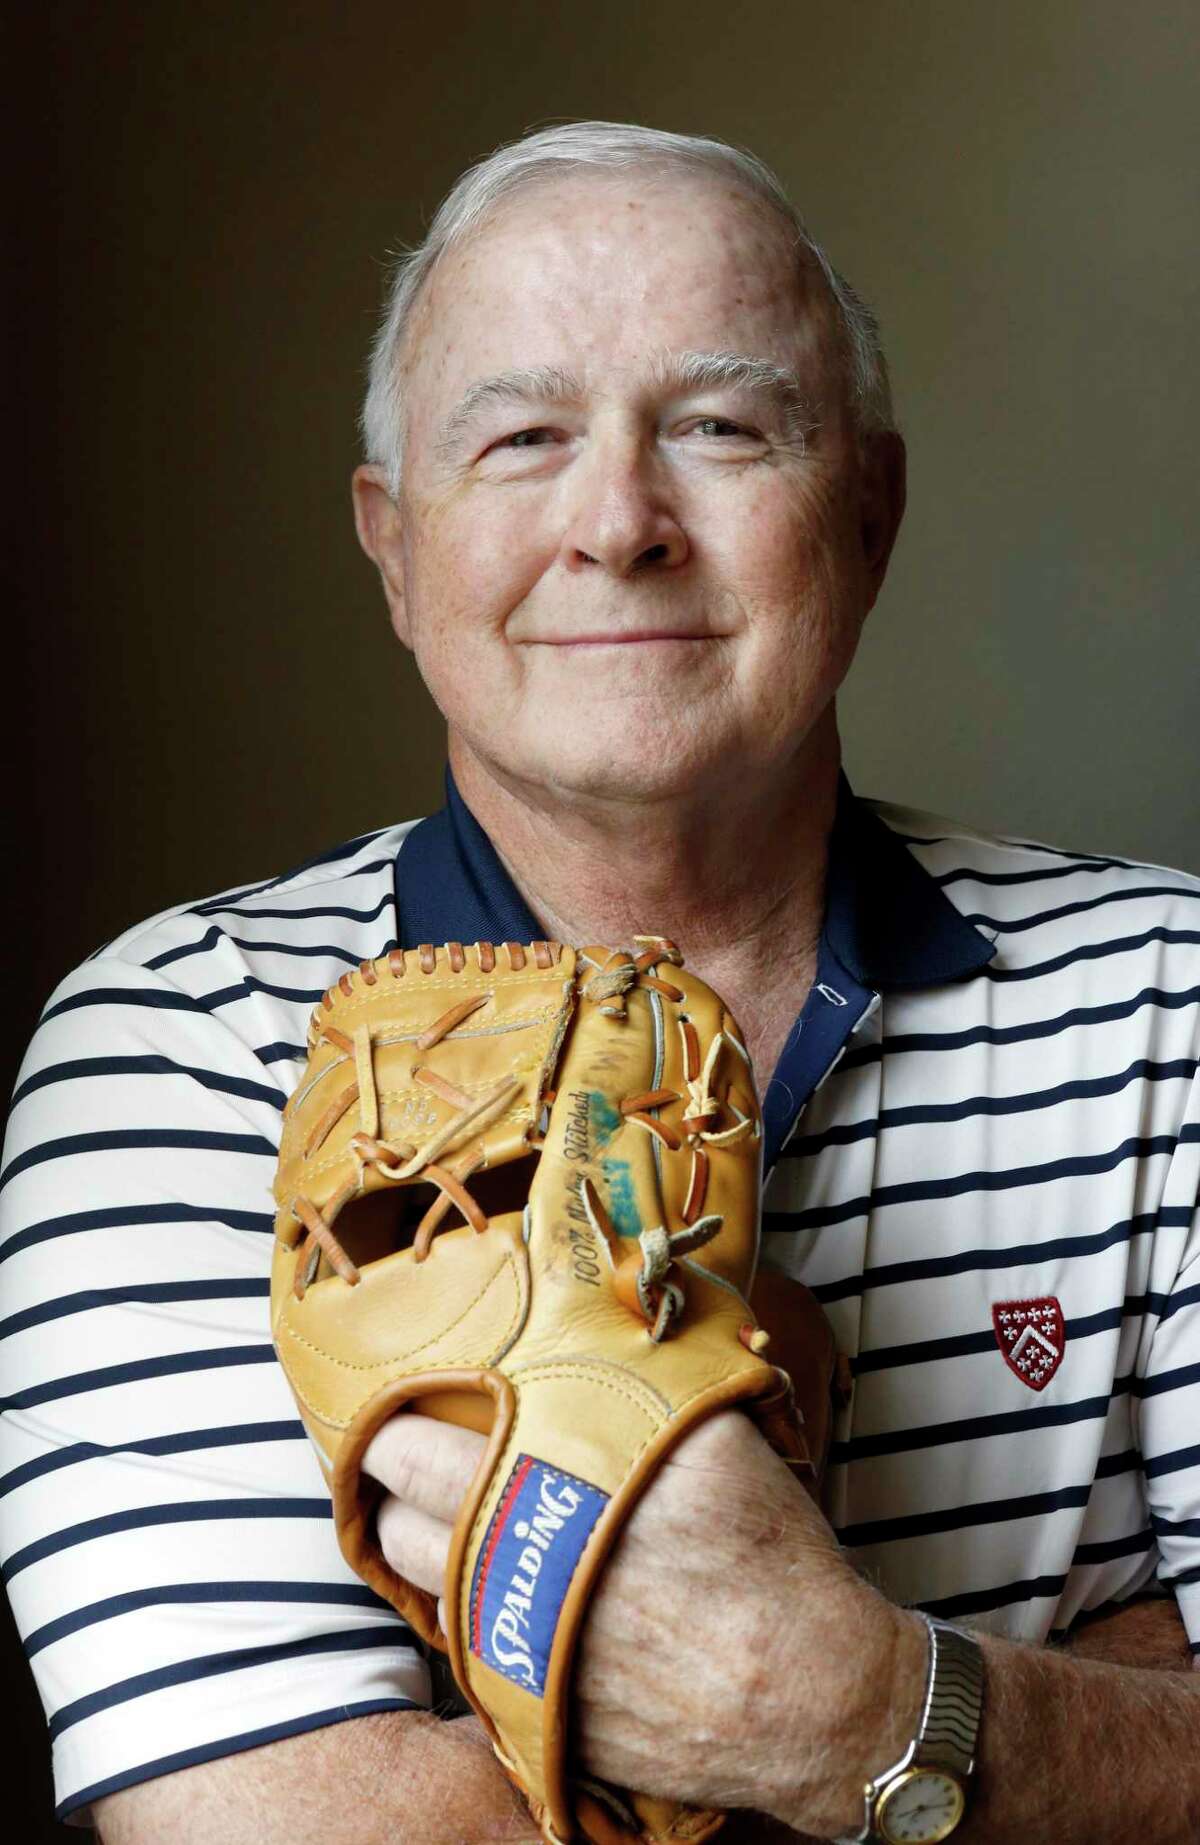 Former Major League Baseball player Billy Grabarkewitz, with a baseball glove he played with, at his home in Colleyville, Texas on Friday, June 14, 2019. Grabarkewitz looks back at the 1970 All-Star Game, which amazingly included three players from San Antonio. (photo by Lara Solt )